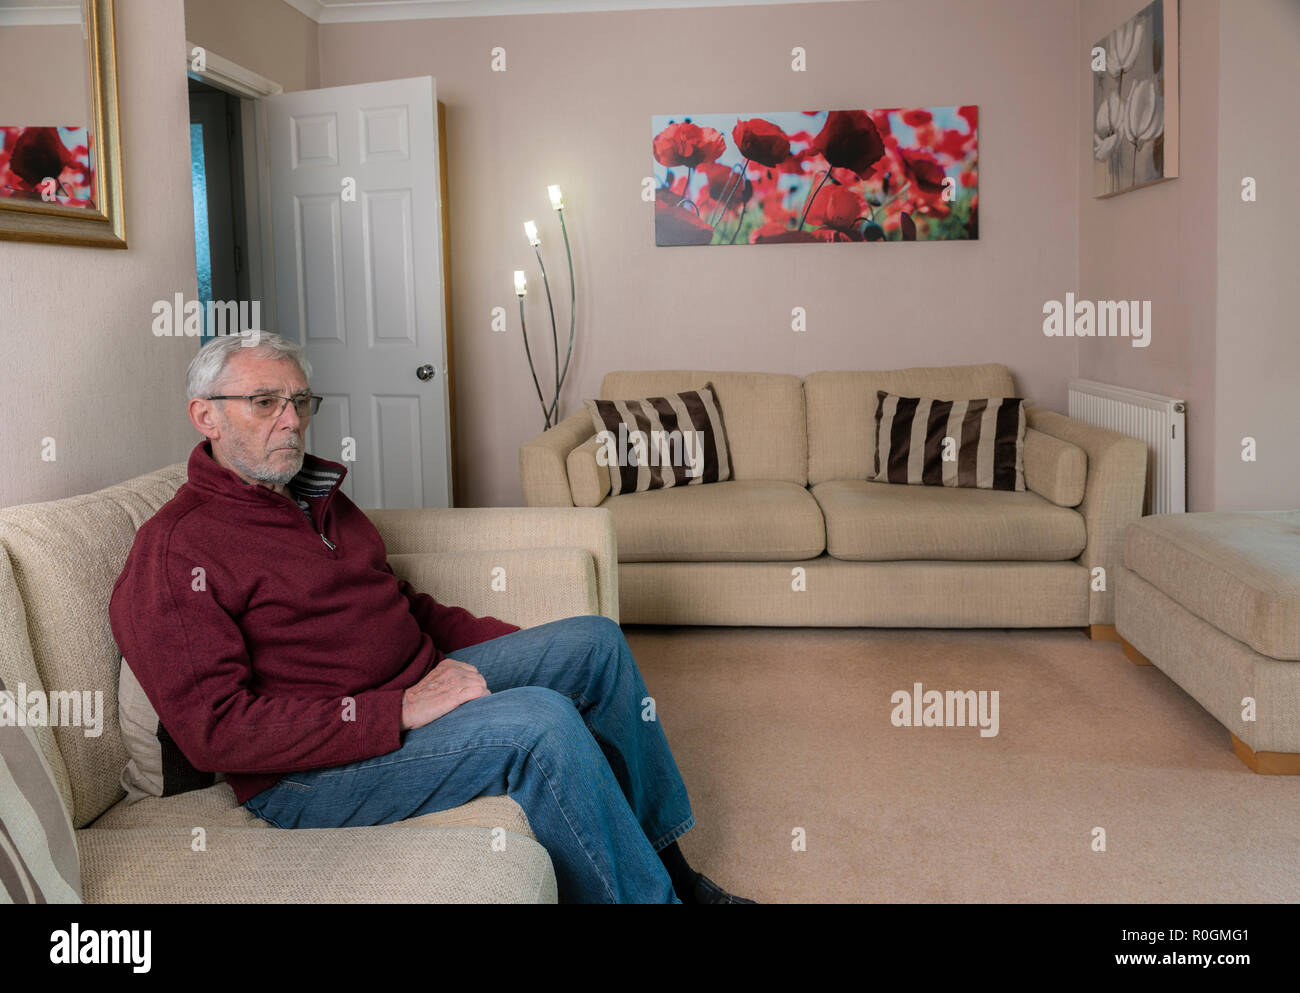 Senior man sitting alone on sofa, grieving after losing a loved one. Loneliness sad and sadness. Stock Photo